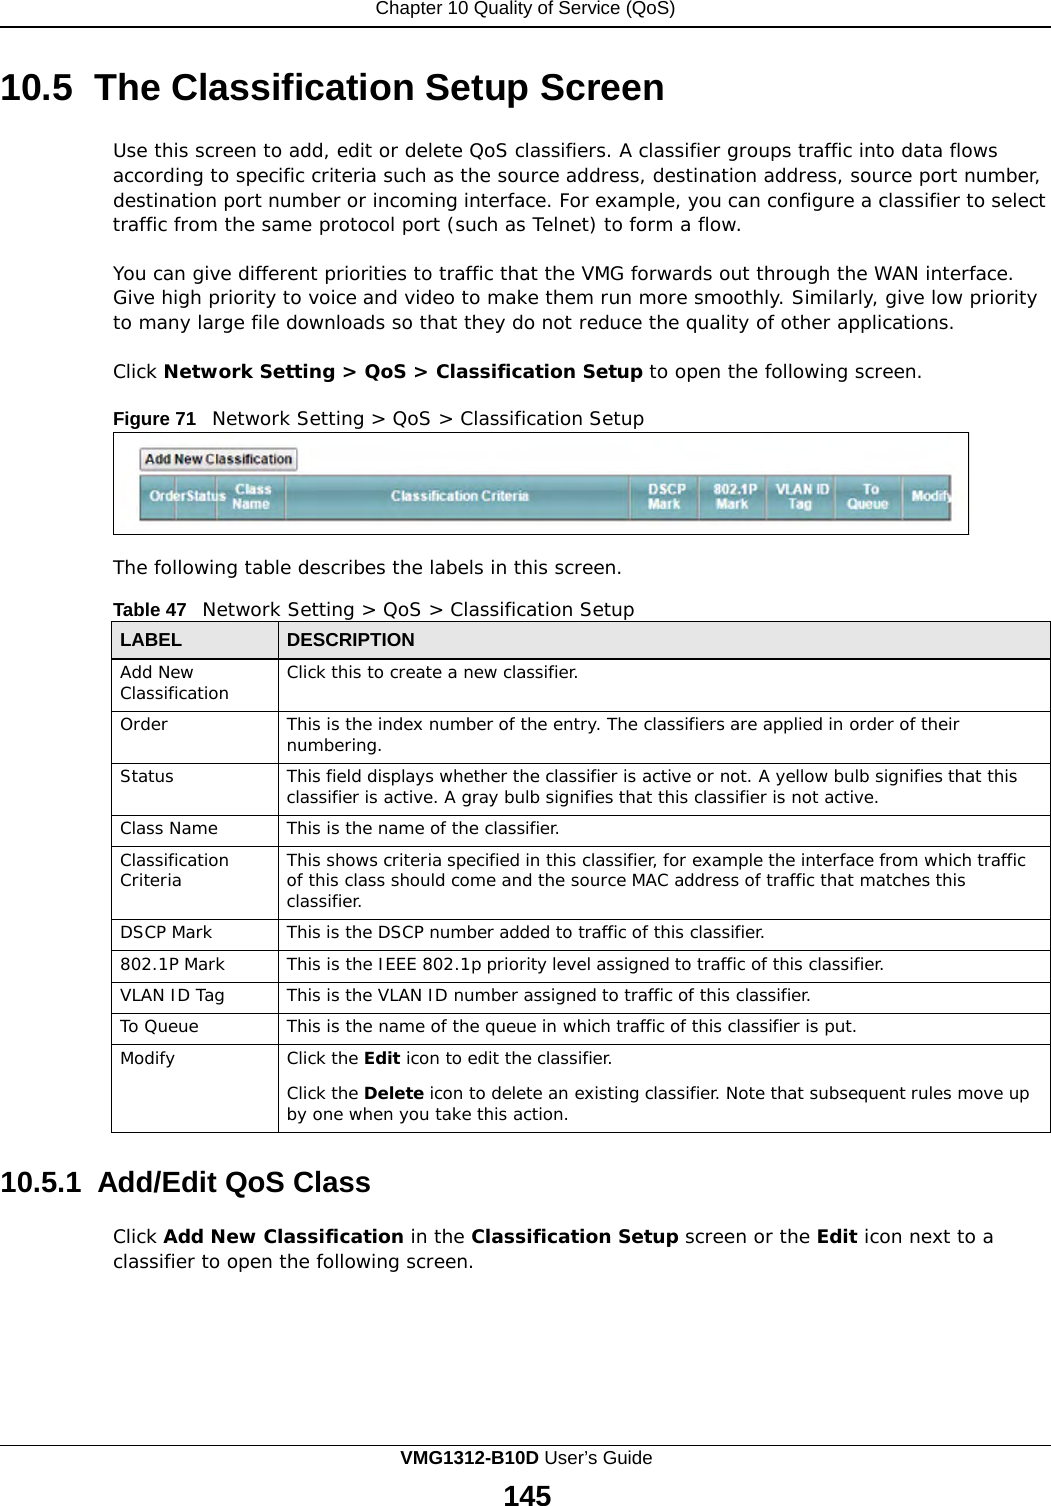 Chapter 10 Quality of Service (QoS)      10.5 The Classification Setup Screen  Use this screen to add, edit or delete QoS classifiers. A classifier groups traffic into data flows according to specific criteria such as the source address, destination address, source port number, destination port number or incoming interface. For example, you can configure a classifier to select traffic from the same protocol port (such as Telnet) to form a flow.  You can give different priorities to traffic that the VMG forwards out through the WAN interface. Give high priority to voice and video to make them run more smoothly. Similarly, give low priority to many large file downloads so that they do not reduce the quality of other applications.  Click Network Setting &gt; QoS &gt; Classification Setup to open the following screen.  Figure 71   Network Setting &gt; QoS &gt; Classification Setup       The following table describes the labels in this screen.  Table 47   Network Setting &gt; QoS &gt; Classification Setup  LABEL DESCRIPTION Add New Classification Click this to create a new classifier. Order This is the index number of the entry. The classifiers are applied in order of their numbering. Status This field displays whether the classifier is active or not. A yellow bulb signifies that this classifier is active. A gray bulb signifies that this classifier is not active. Class Name This is the name of the classifier. Classification Criteria This shows criteria specified in this classifier, for example the interface from which traffic of this class should come and the source MAC address of traffic that matches this classifier. DSCP Mark This is the DSCP number added to traffic of this classifier. 802.1P Mark This is the IEEE 802.1p priority level assigned to traffic of this classifier. VLAN ID Tag This is the VLAN ID number assigned to traffic of this classifier. To Queue This is the name of the queue in which traffic of this classifier is put. Modify Click the Edit icon to edit the classifier.  Click the Delete icon to delete an existing classifier. Note that subsequent rules move up by one when you take this action.  10.5.1  Add/Edit QoS Class  Click Add New Classification in the Classification Setup screen or the Edit icon next to a classifier to open the following screen. VMG1312-B10D User’s Guide 145  